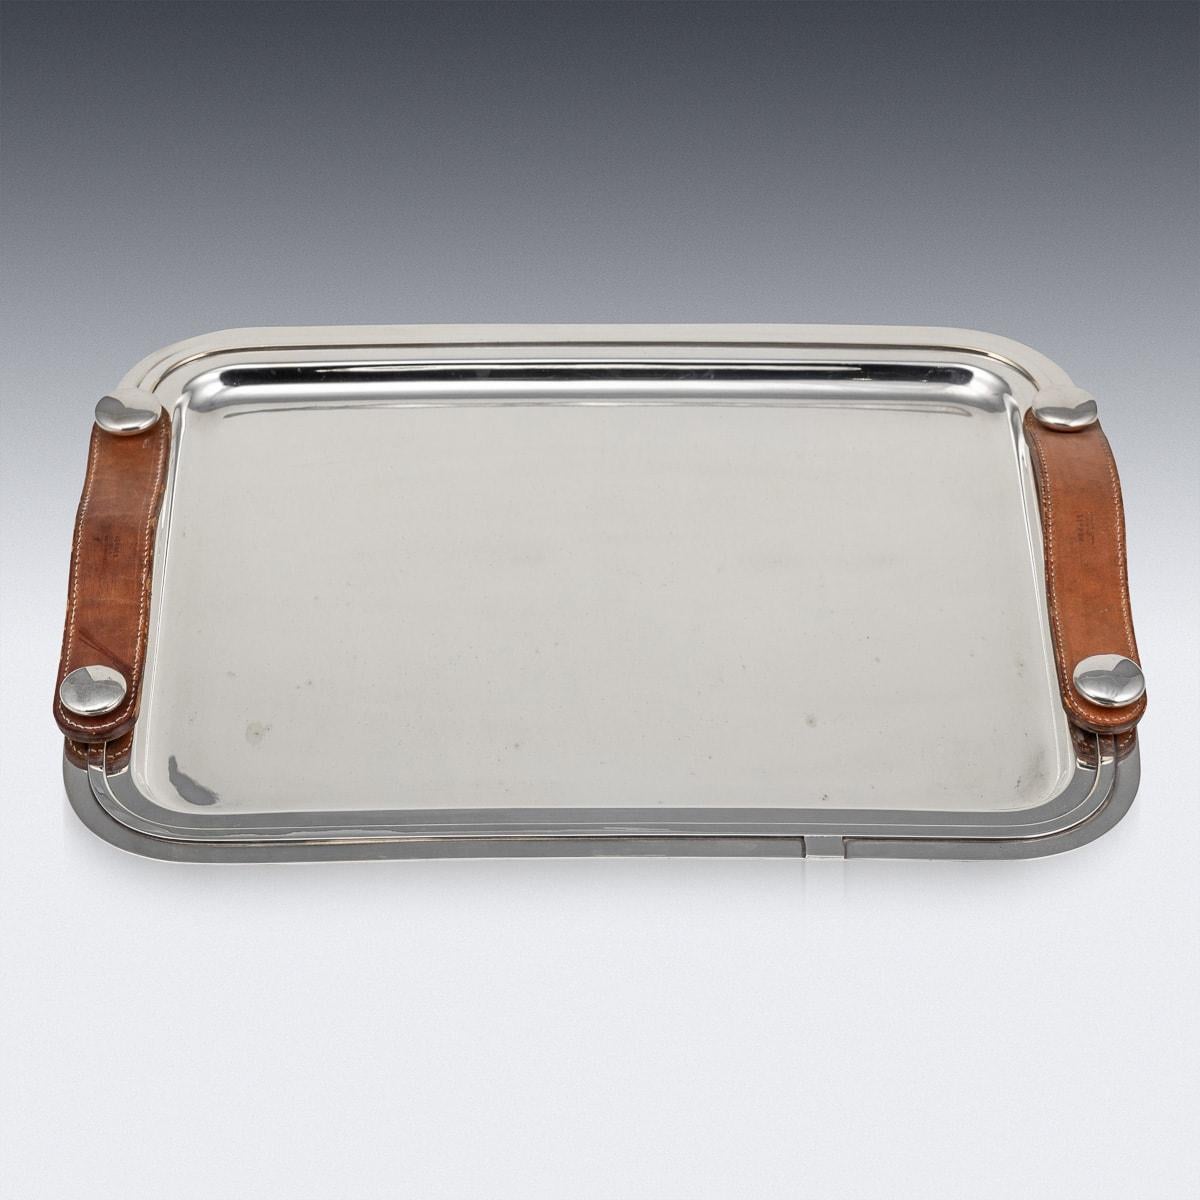 A Vintage 20th Century silver plated tray designed and retailed by the renowned fashion house Hermès, Paris. Of a rectangular shape featuring button style plated attachments with leather handles. Stamped into the leather, 